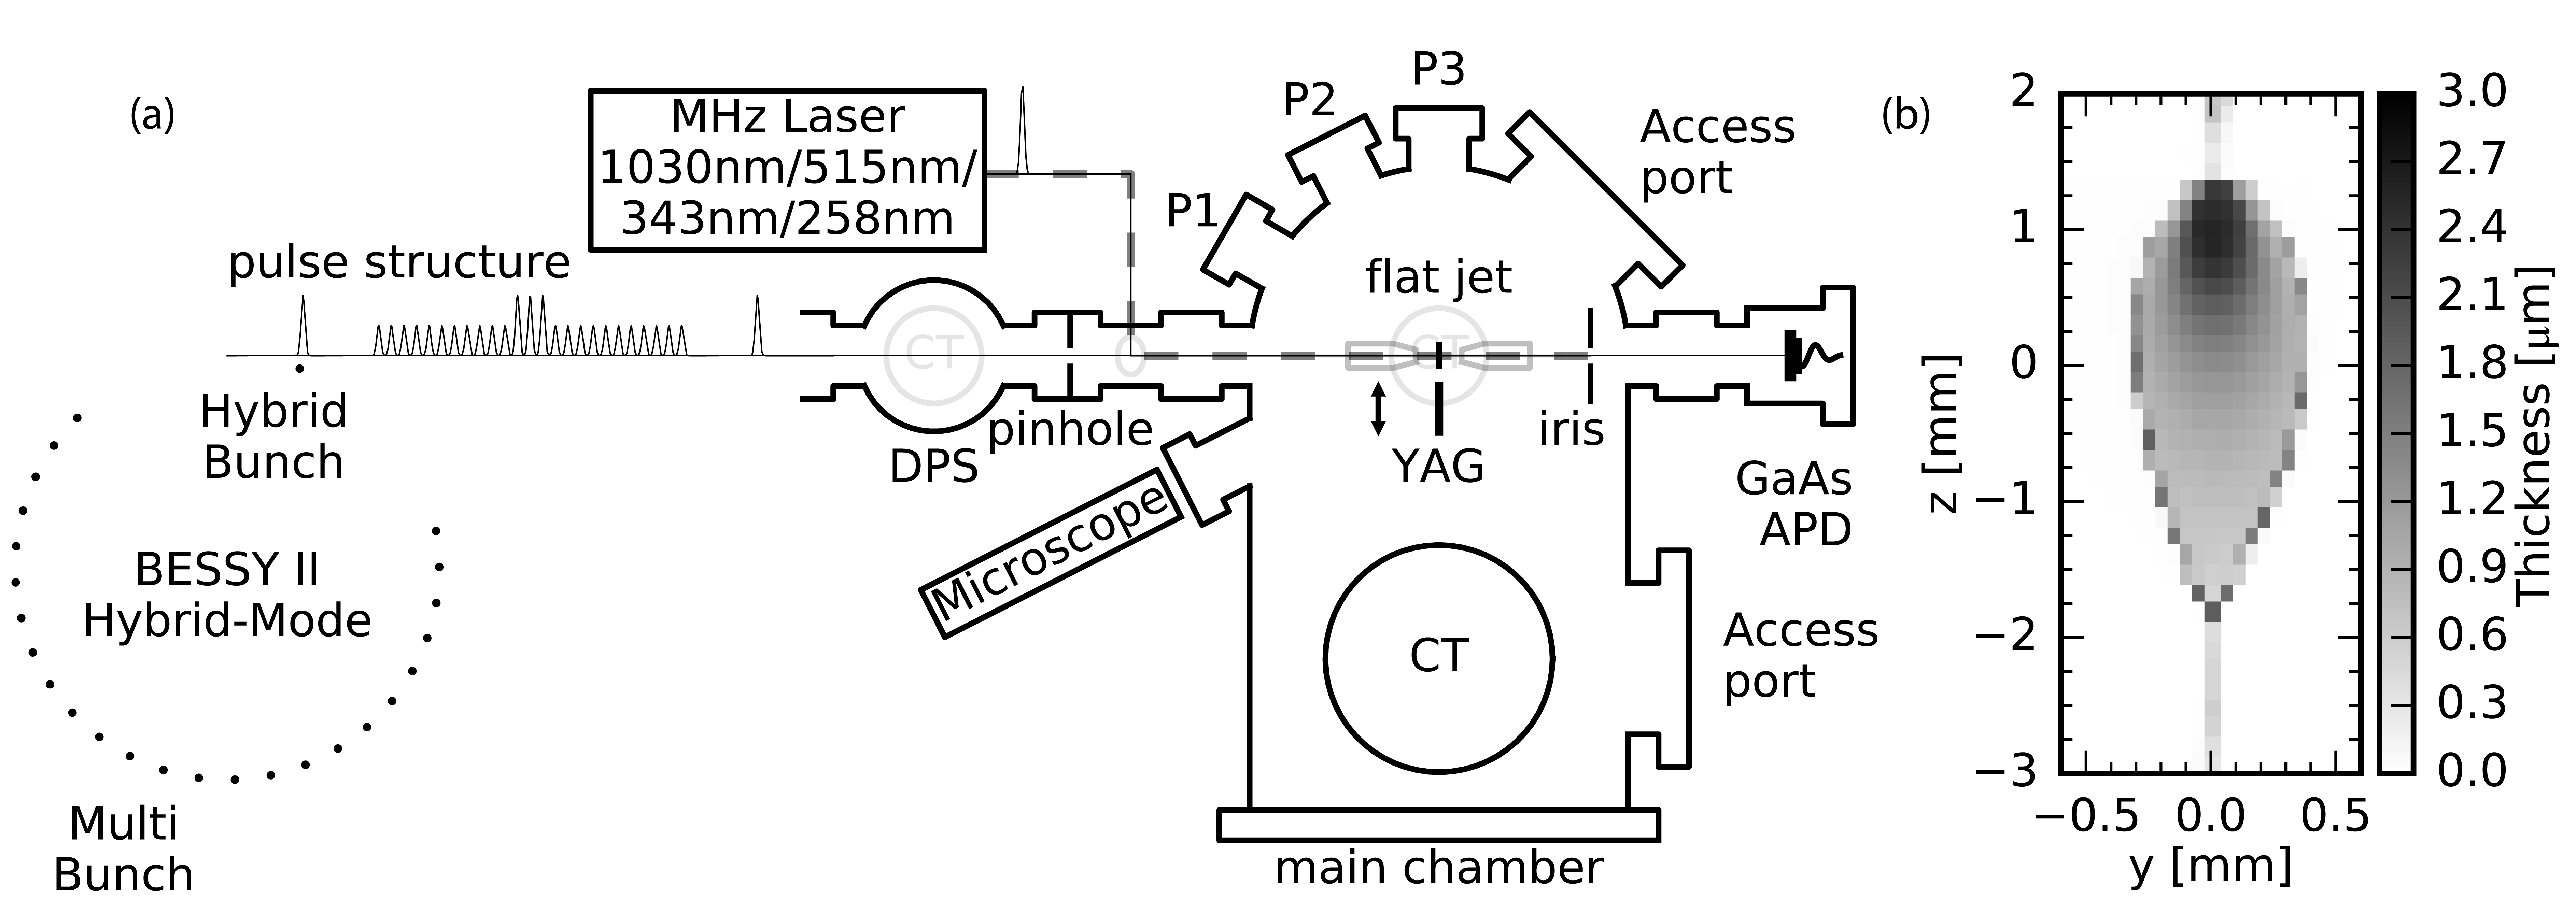 (a) Schematic top view of the experimental layout for static and time resolved NEXAFS measurements of liquid samples. (b) Thickness variation across a water flatjet based on the transmitted intensity